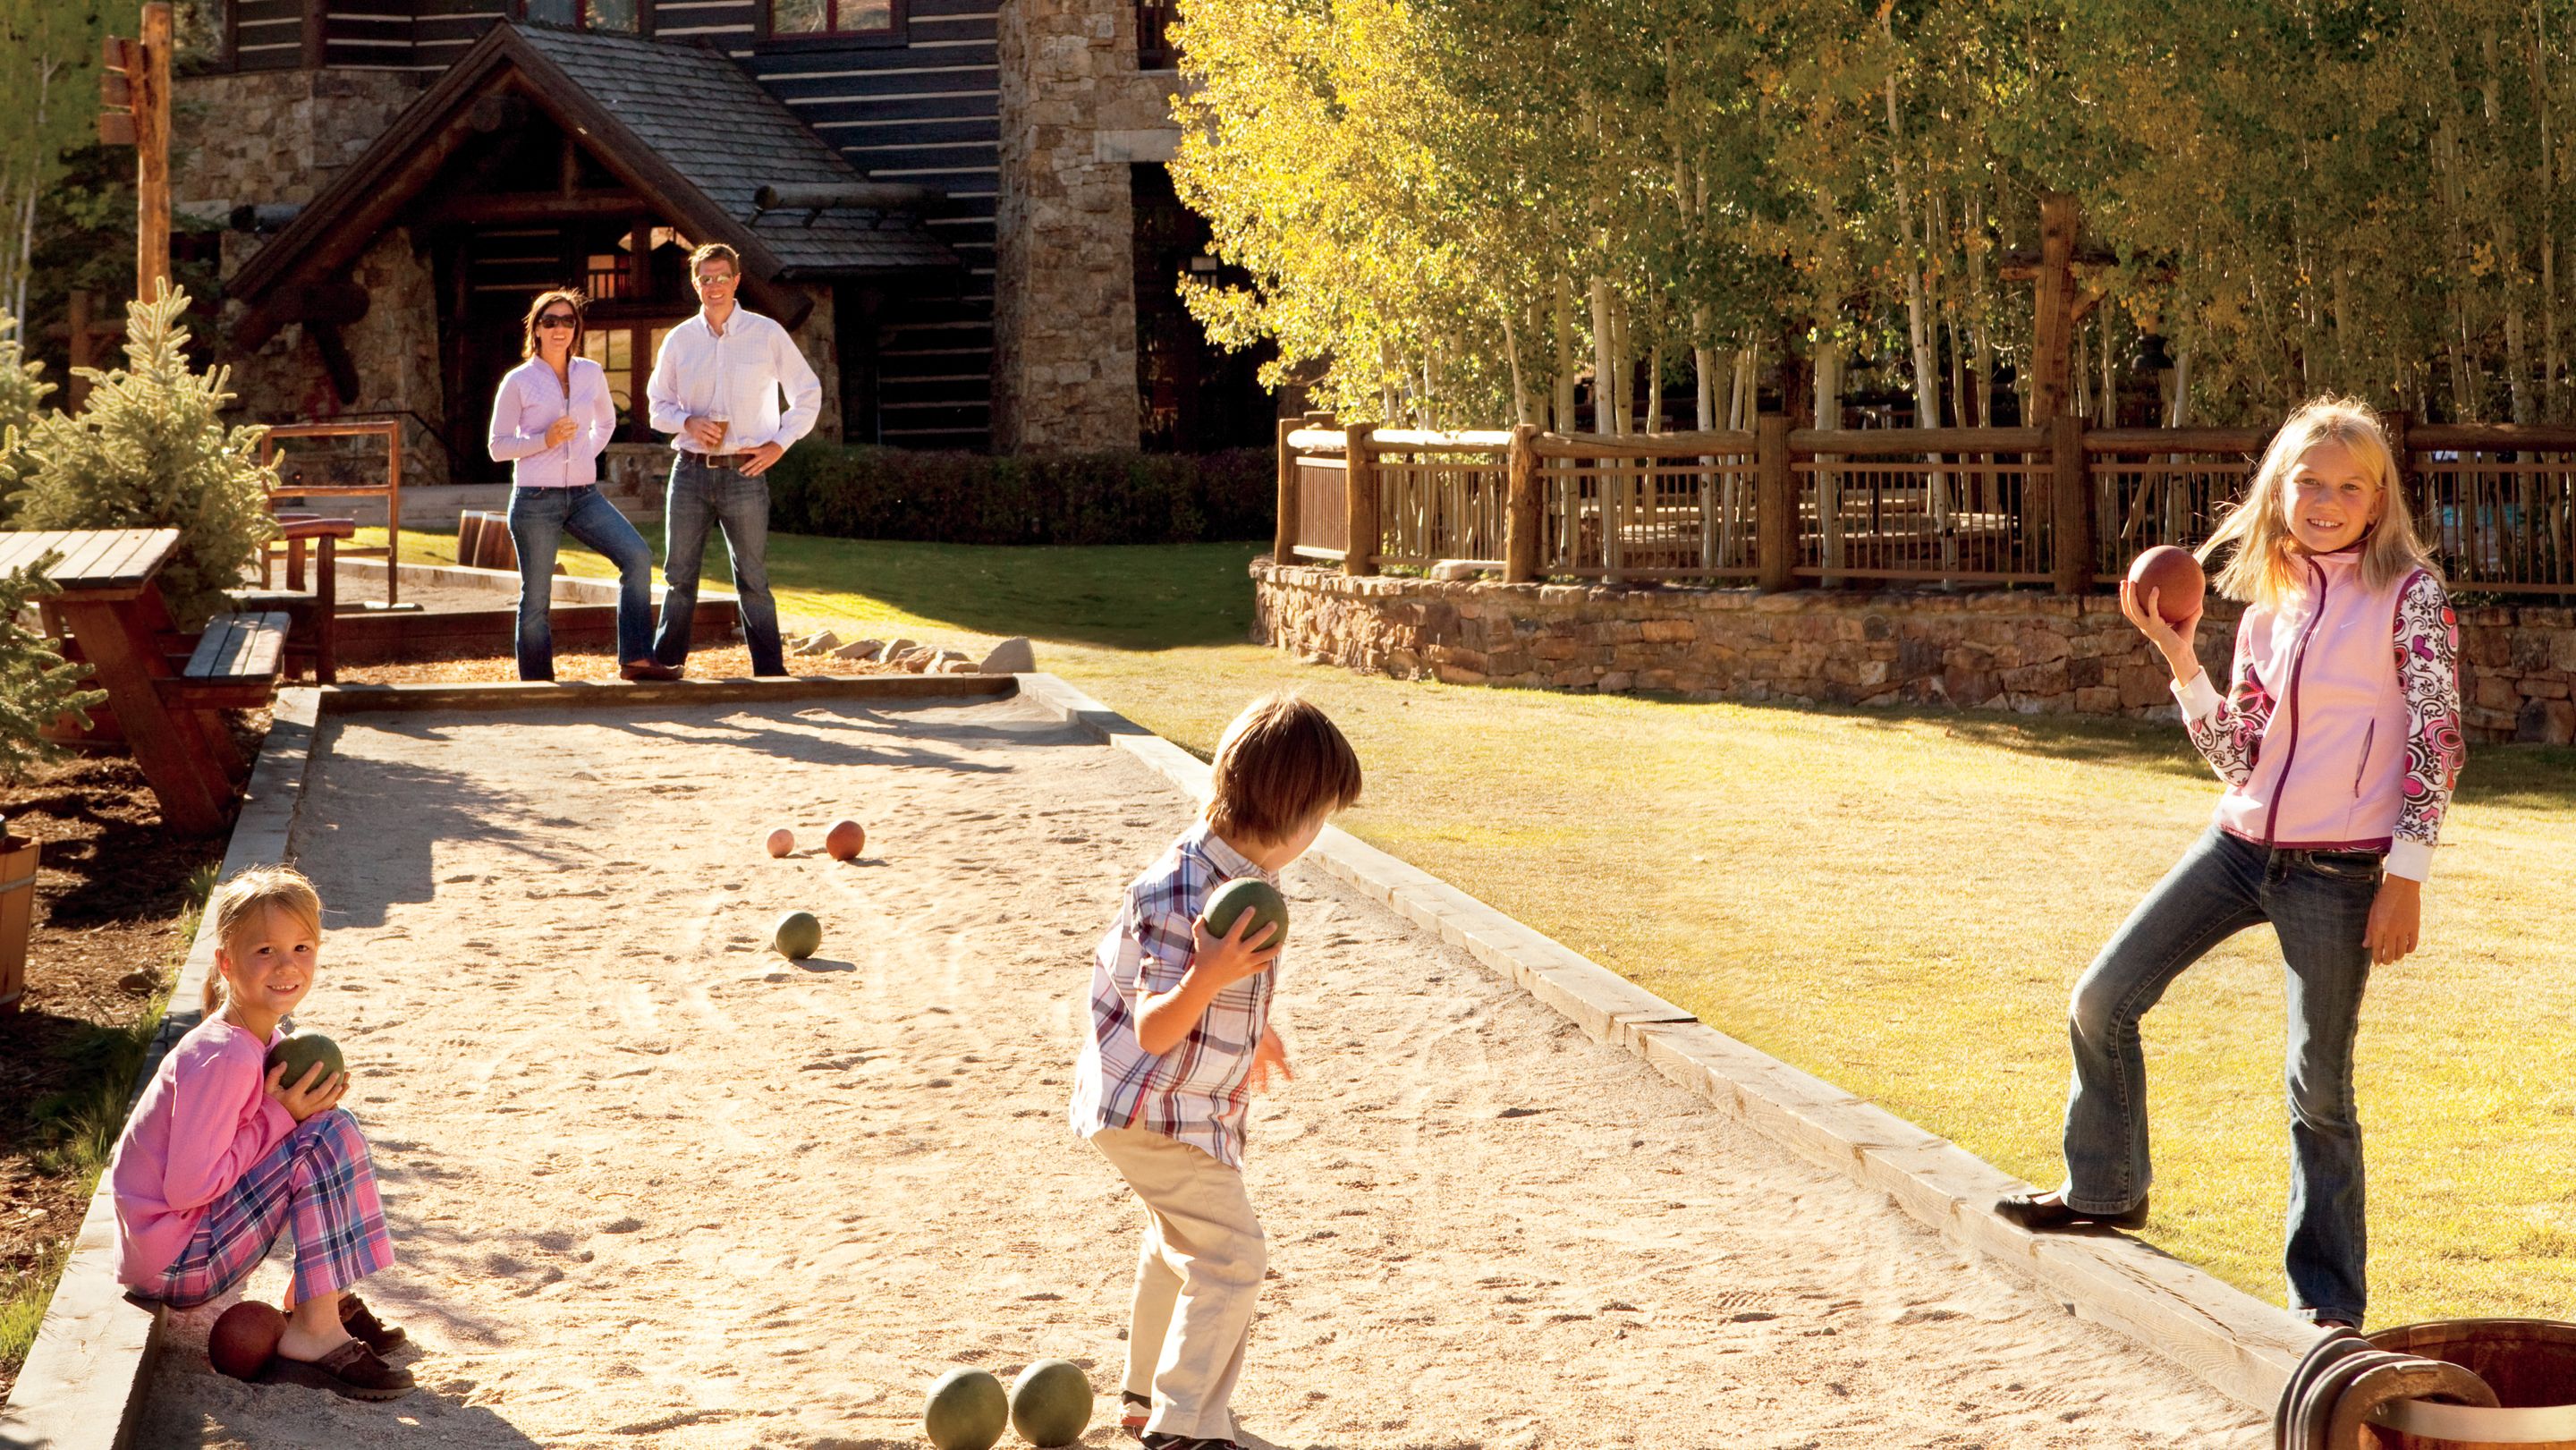 A family of five plays on an outdoor bocce ball court